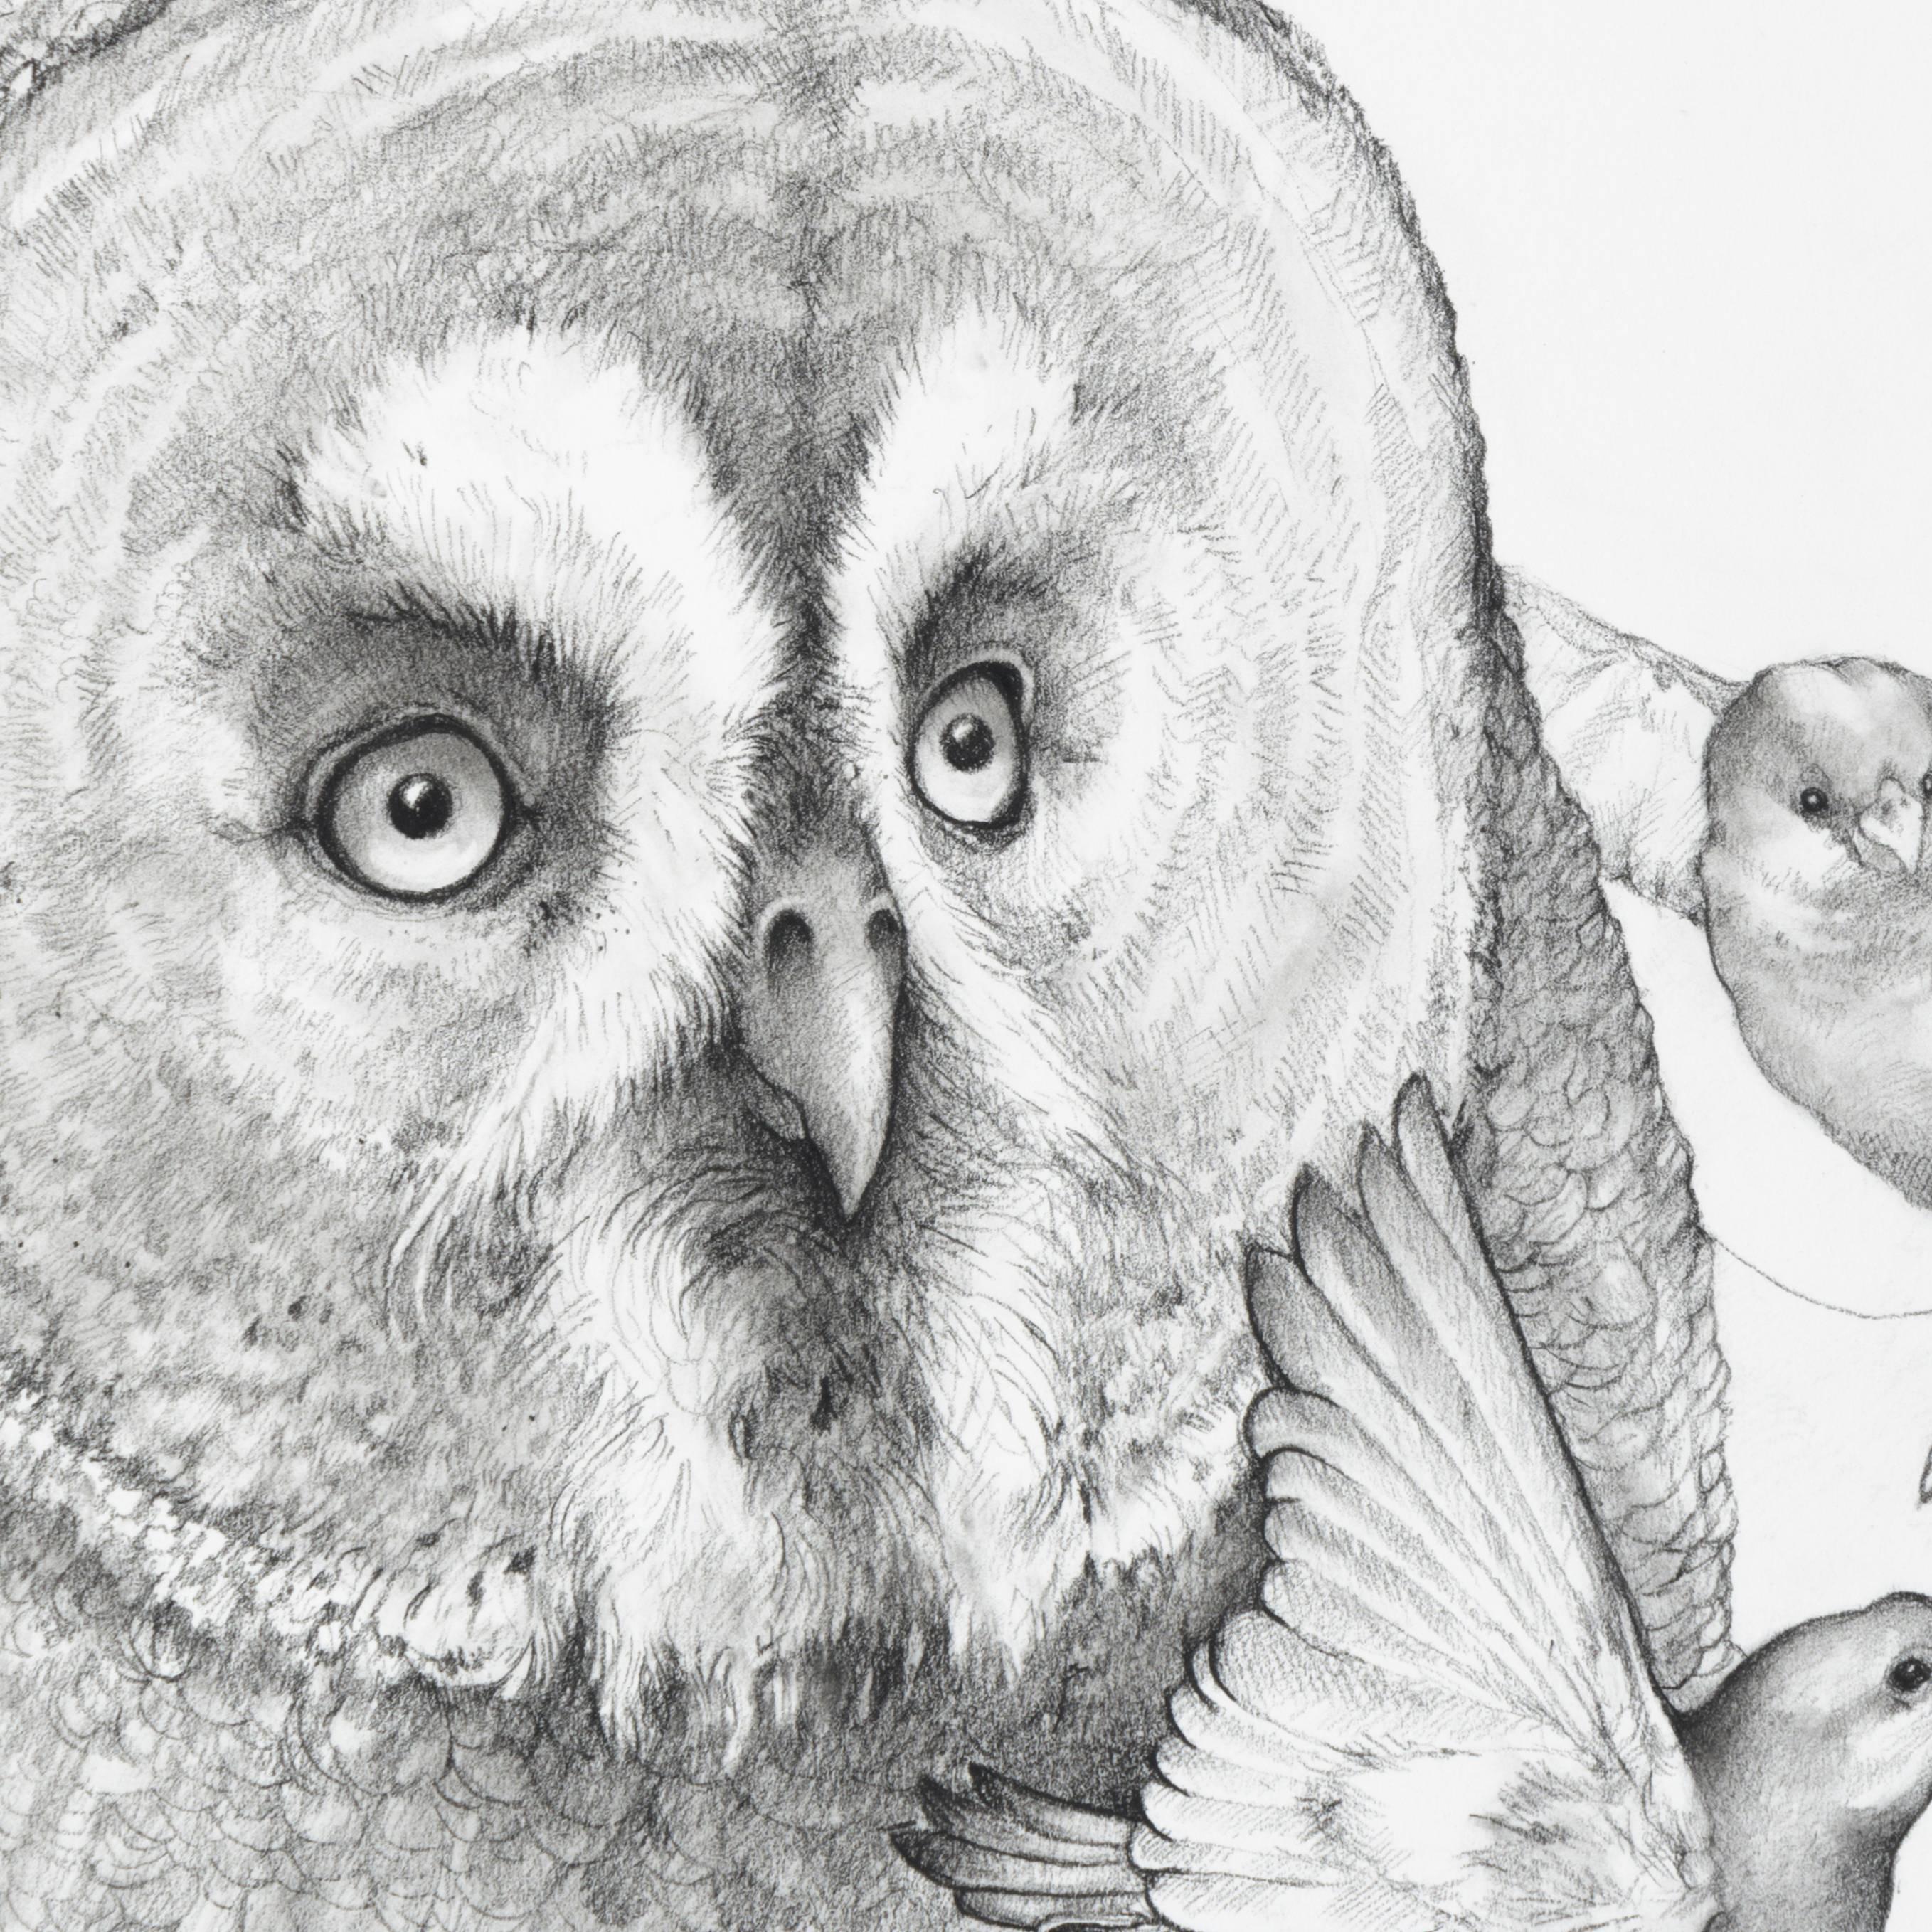 Together, carbon pencil portrait of an owl with birds  - Art by Adonna Khare